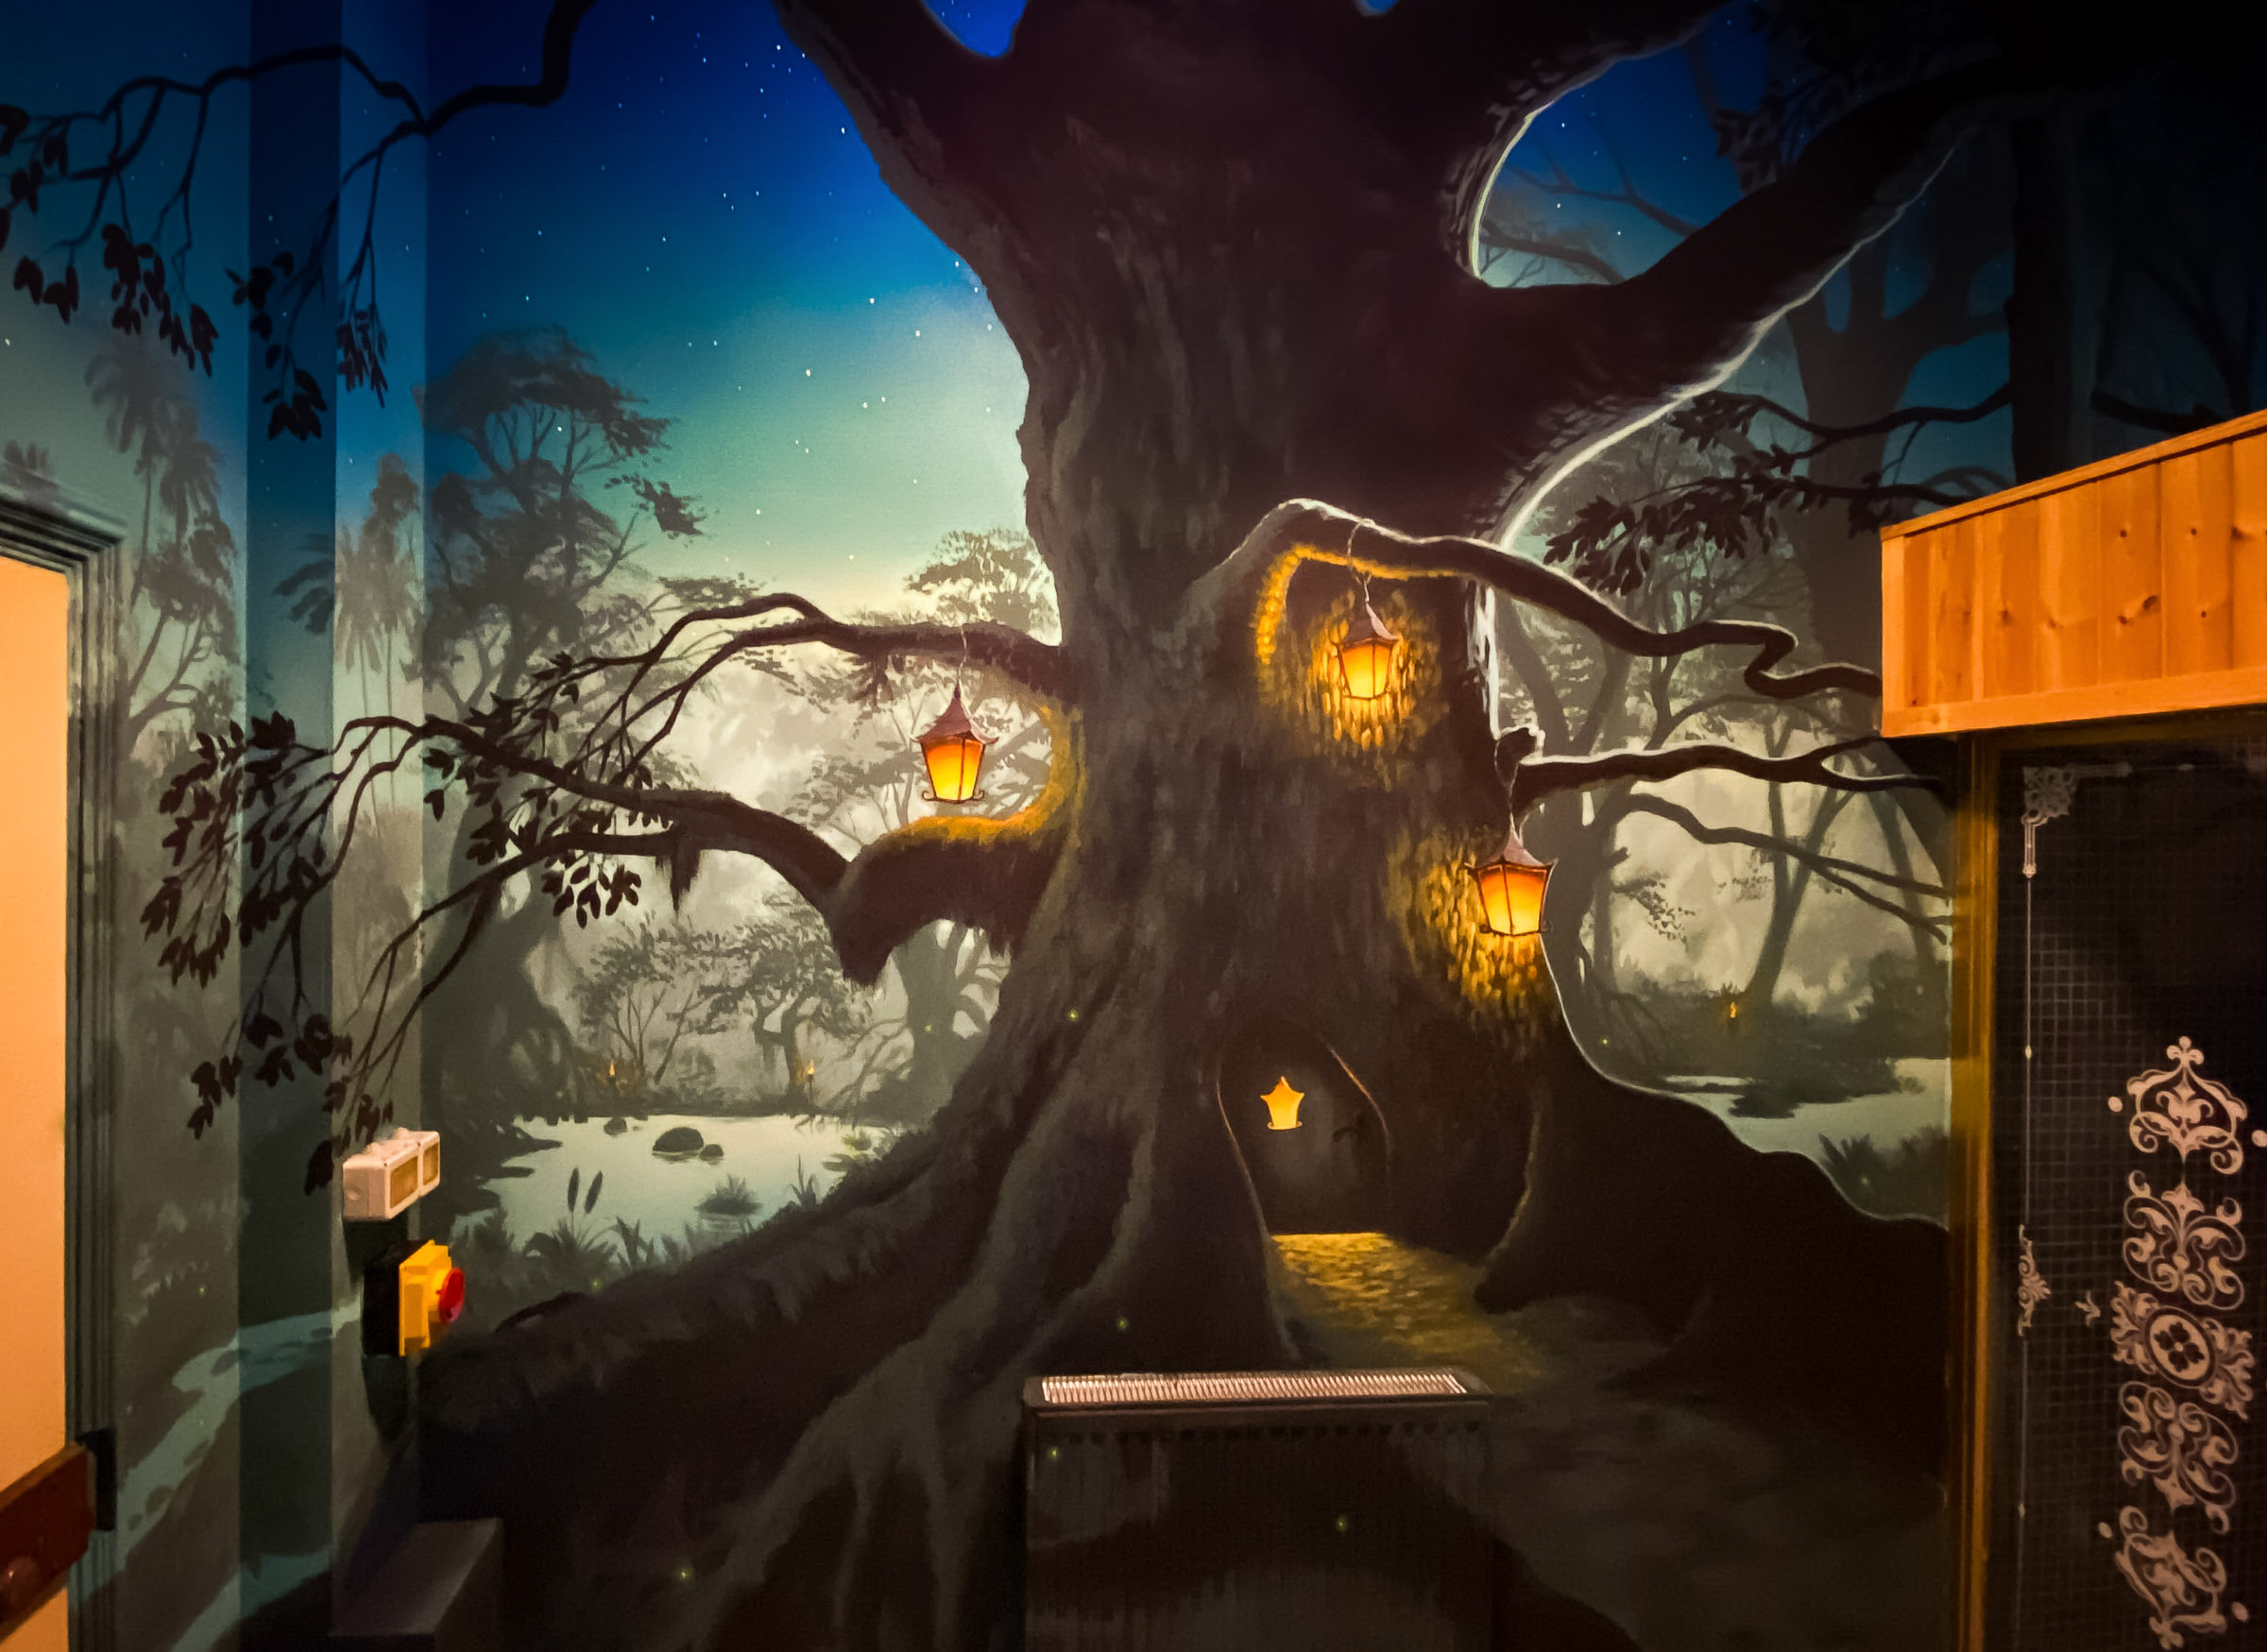 Lantern lit swamp Mural, here featuring a large, lived in tree